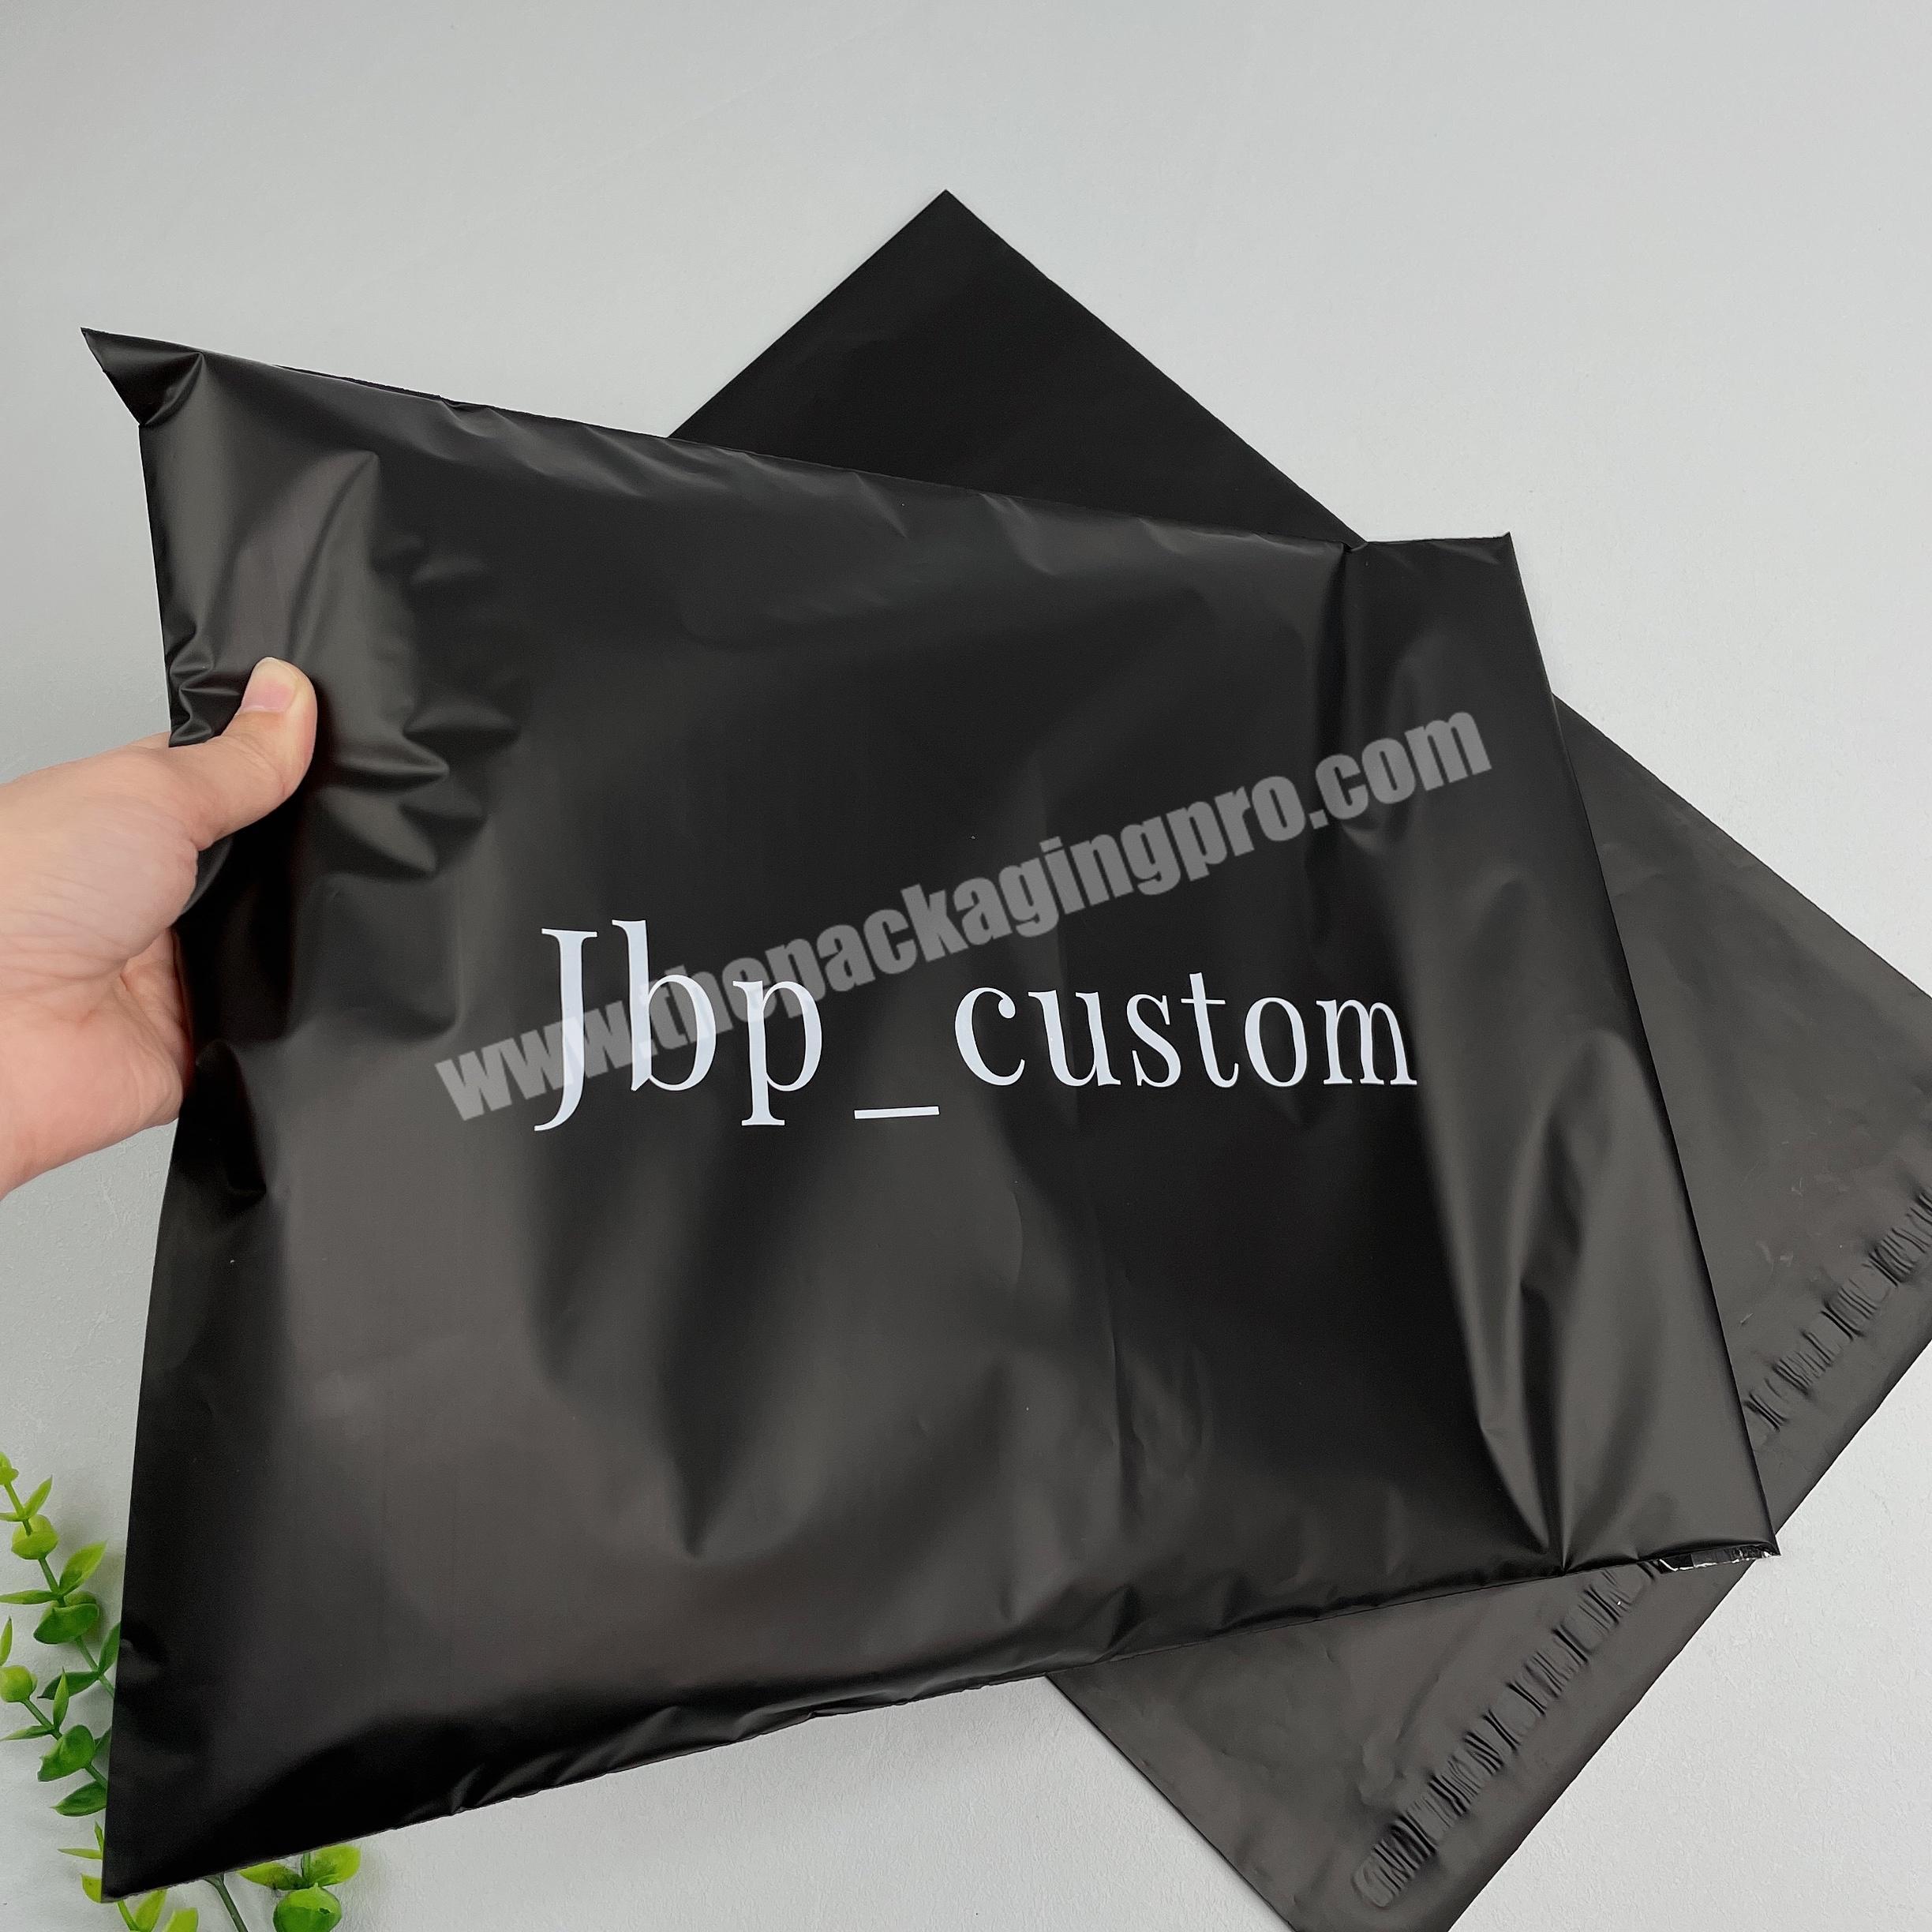 https://thepackagingpro.com/media/goods/images/2022/7/Matte-black-biodegradable-custom-logo-printed-shipping-12x16inches-strong-poly-mailer-package-mailing-bags-for-clothing-dresses-3.jpg